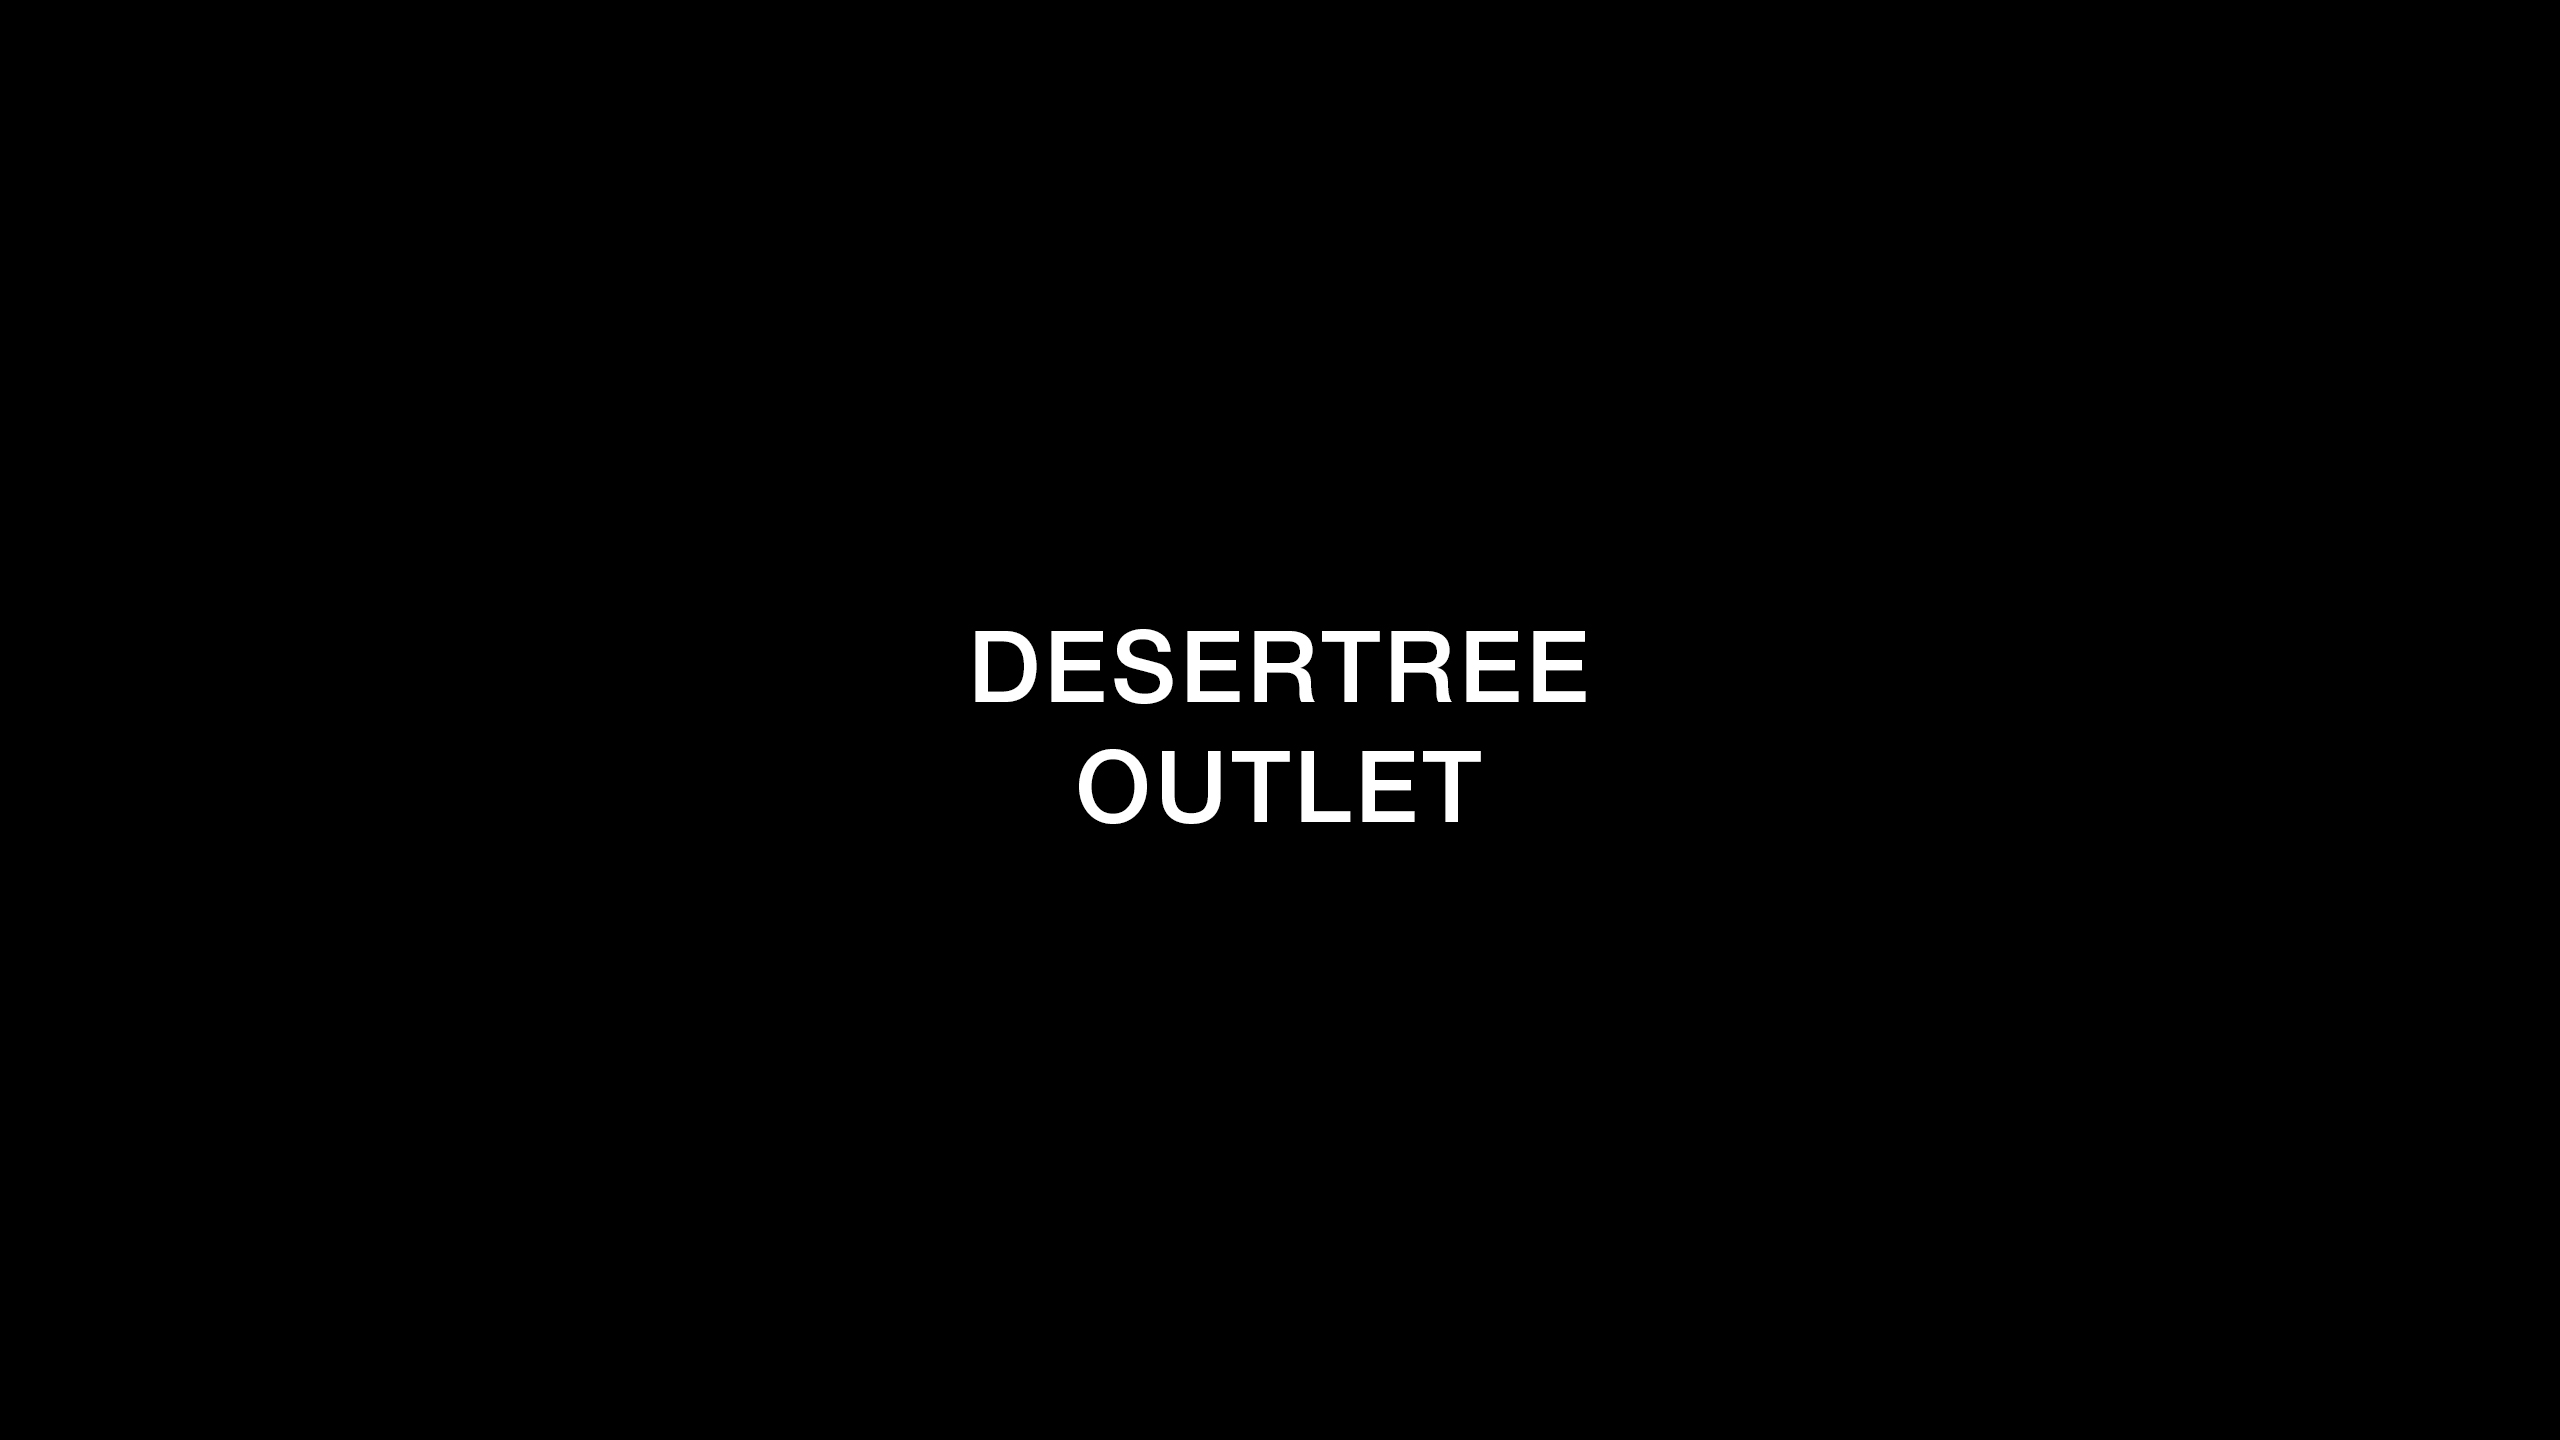 [New Open] DMC Desertree Outlet